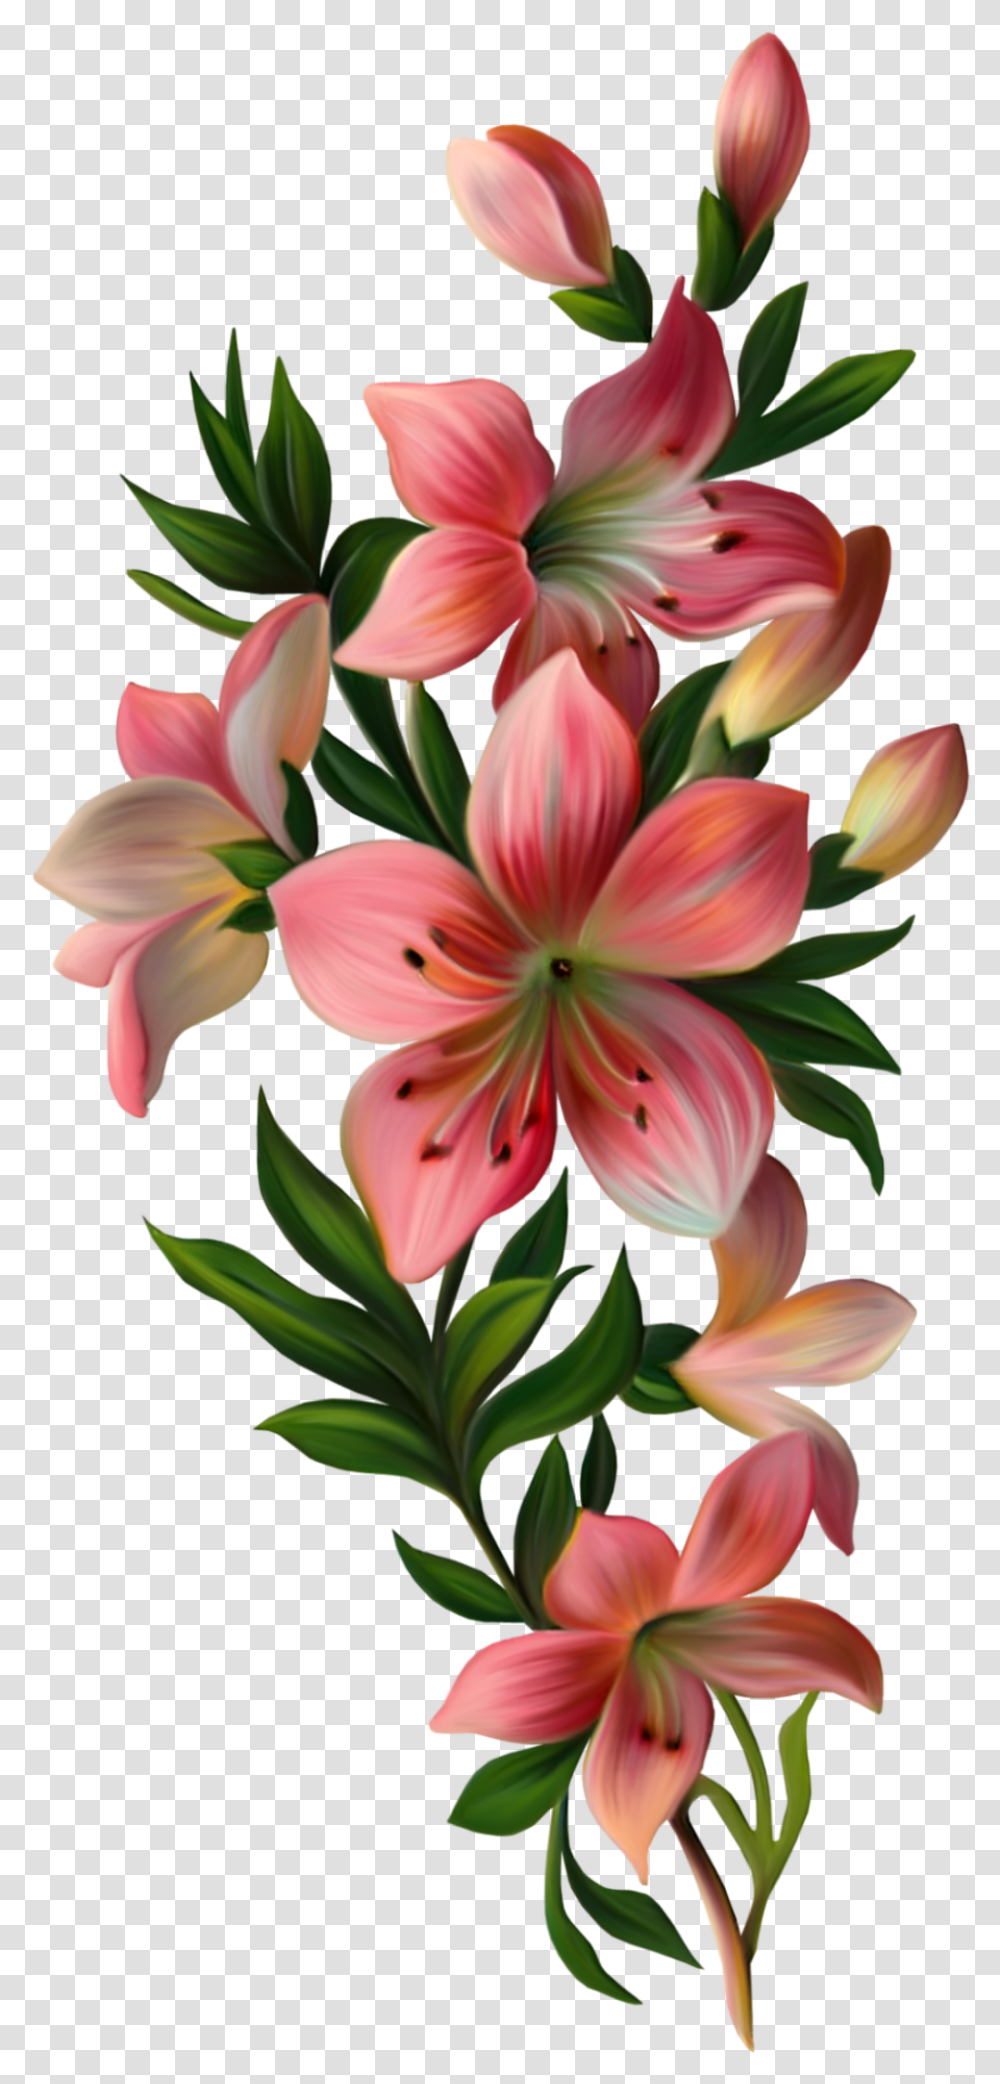 Mq Pink Lily Flowers Flower Garden Nature Flowers With Leaves, Plant, Blossom, Amaryllis, Pineapple Transparent Png